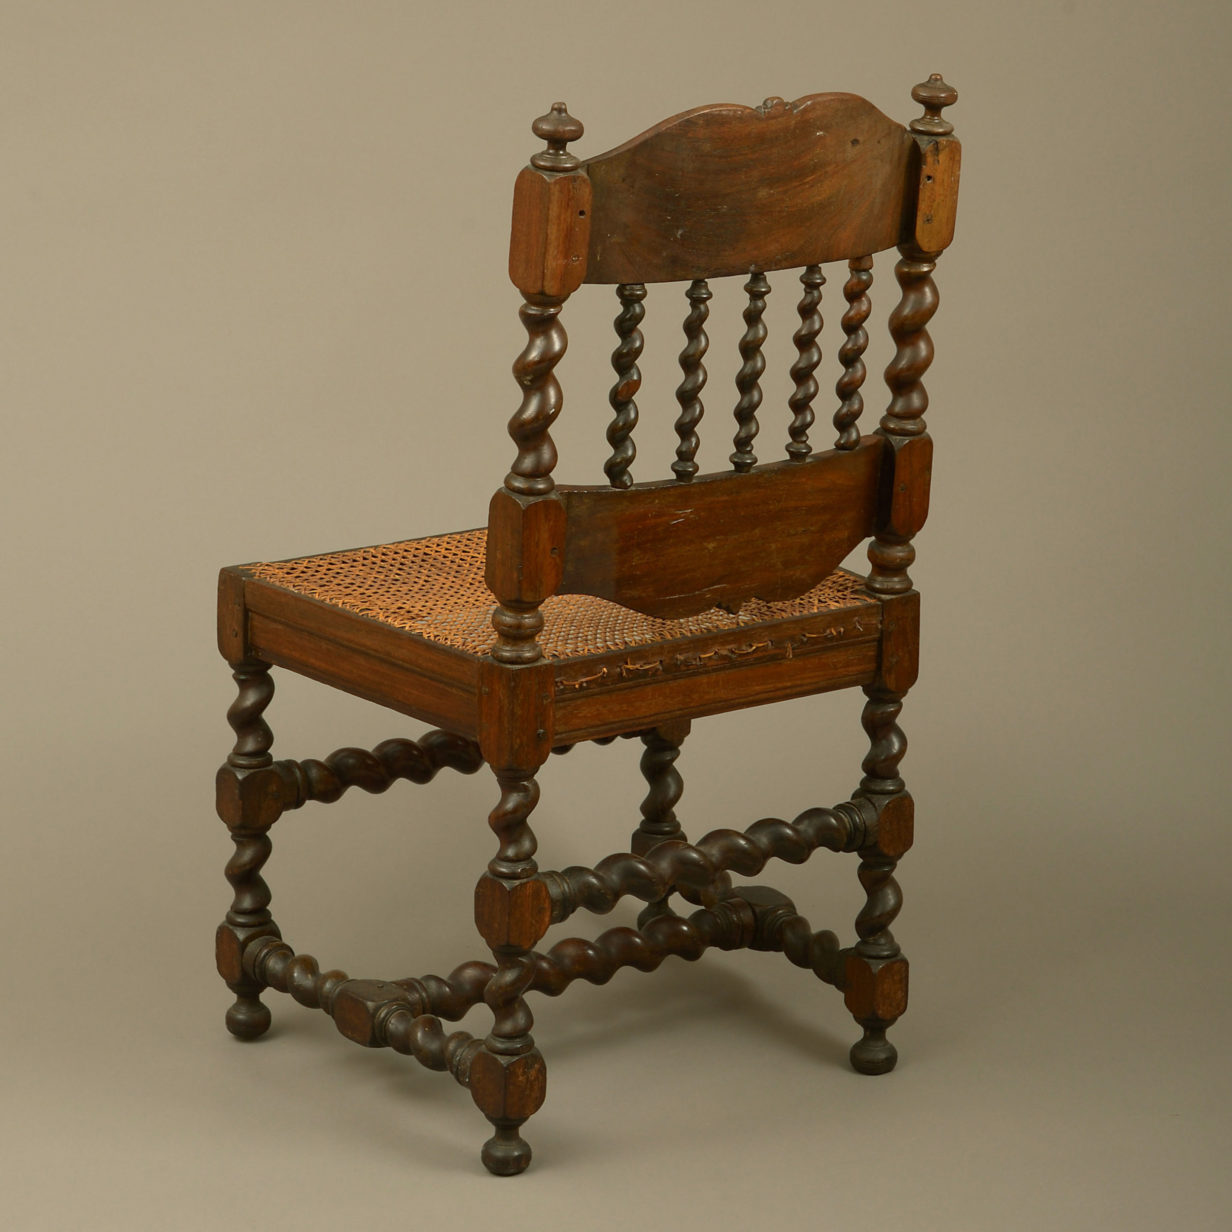 An early 18th century pair of cape dutch stinkwood chairs